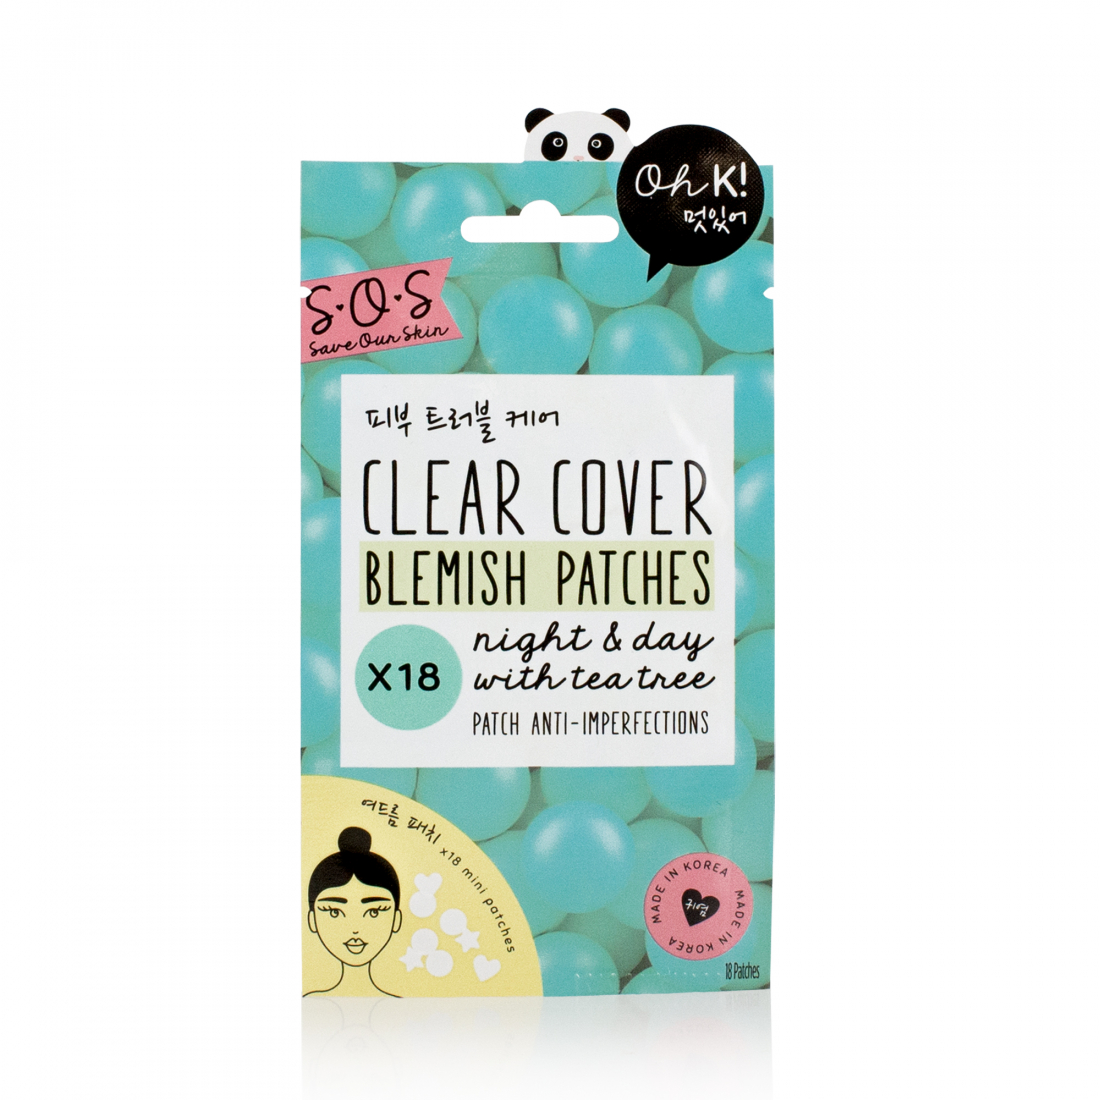 'SOS Clear Cover Blemish' Patches - 18 Einheiten